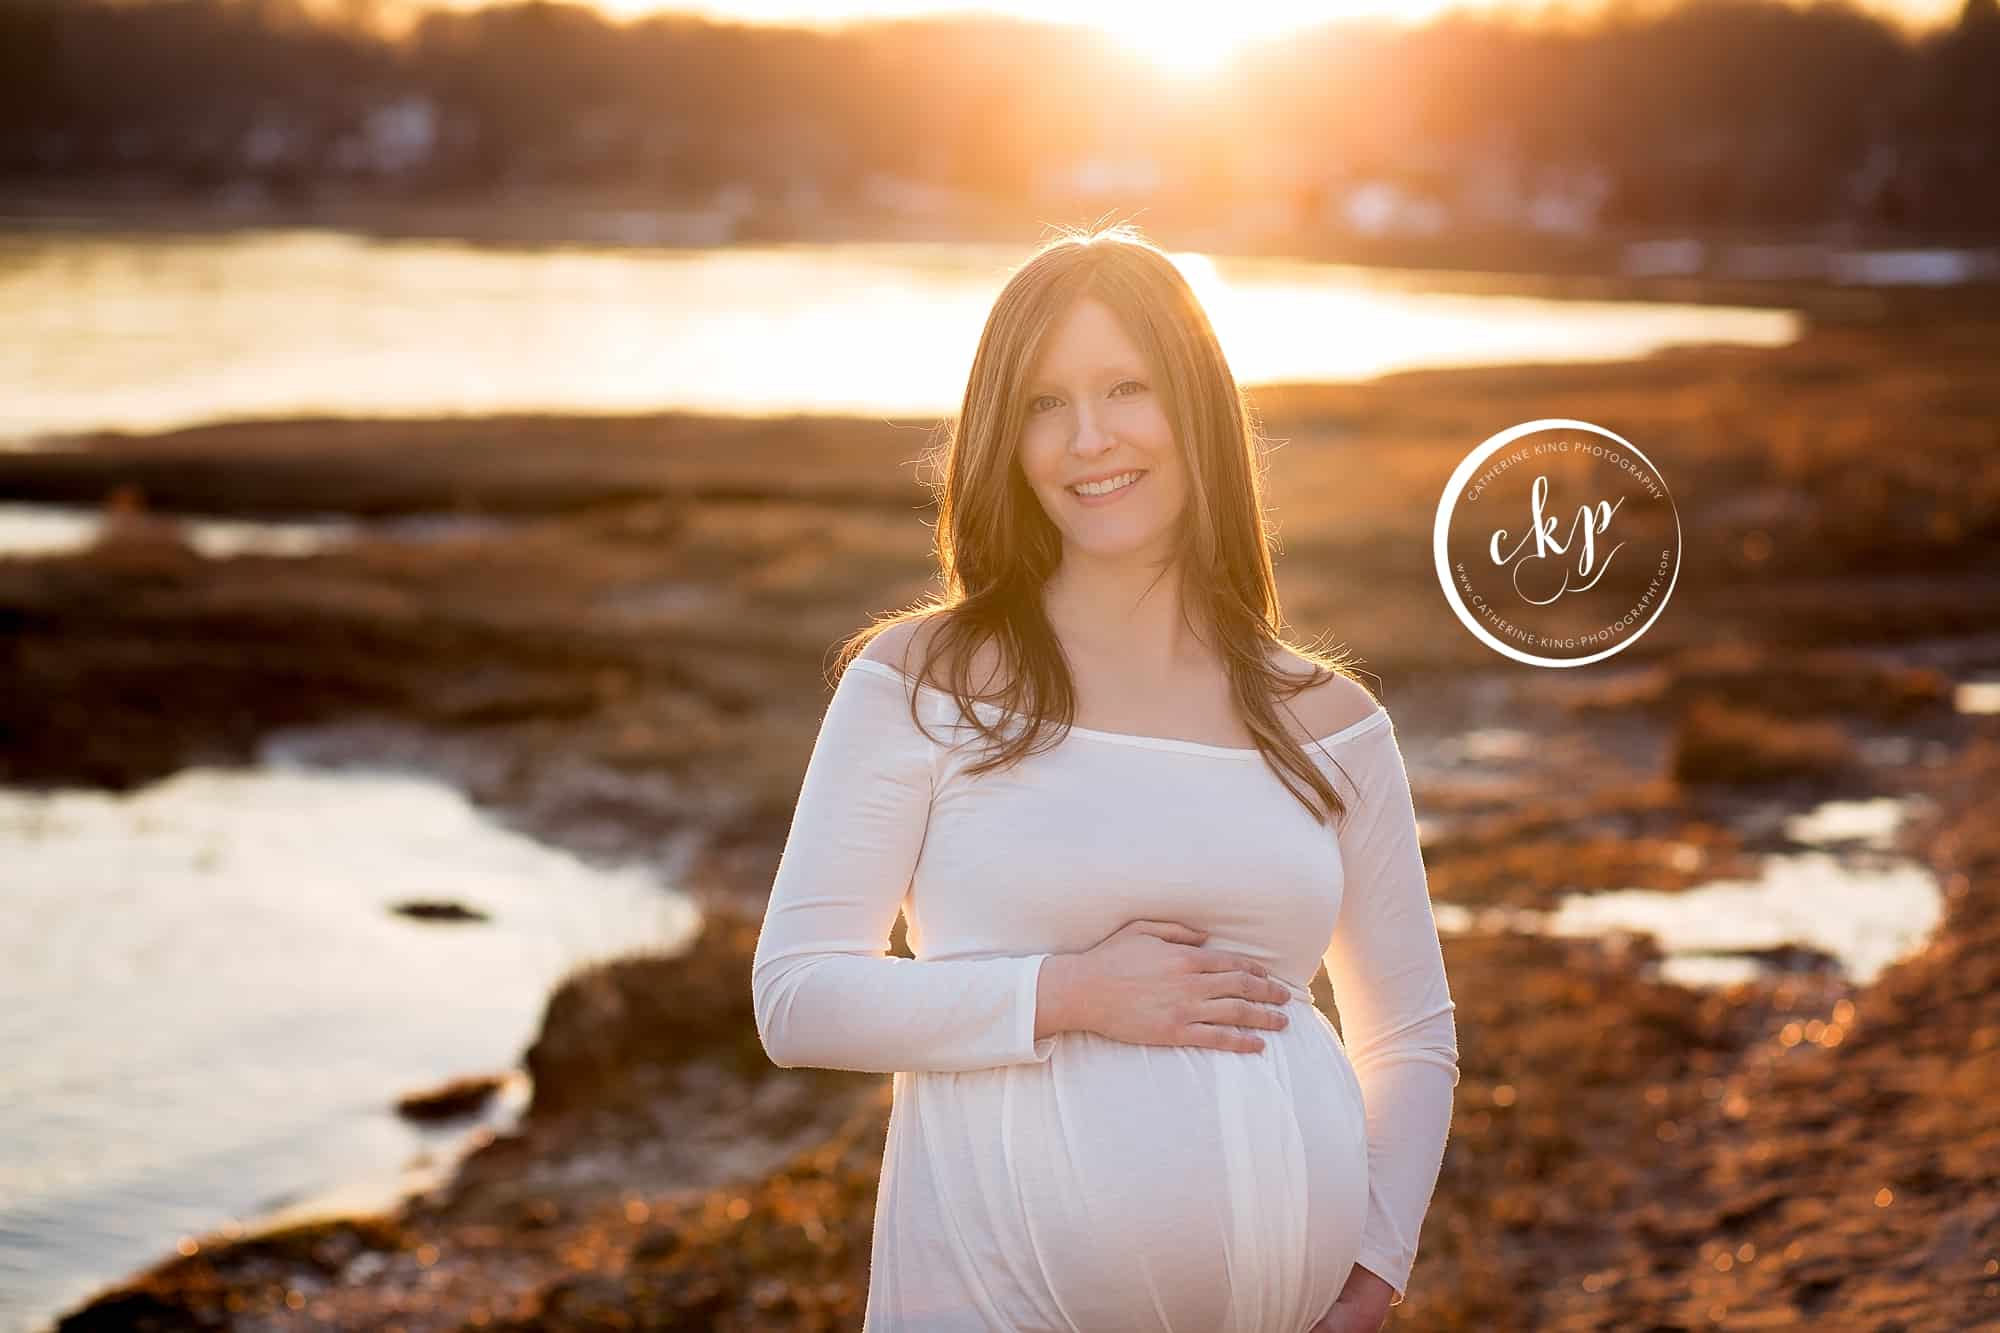 ct maternity photography session with a toddler by catherine king photography a ct newborn photographer